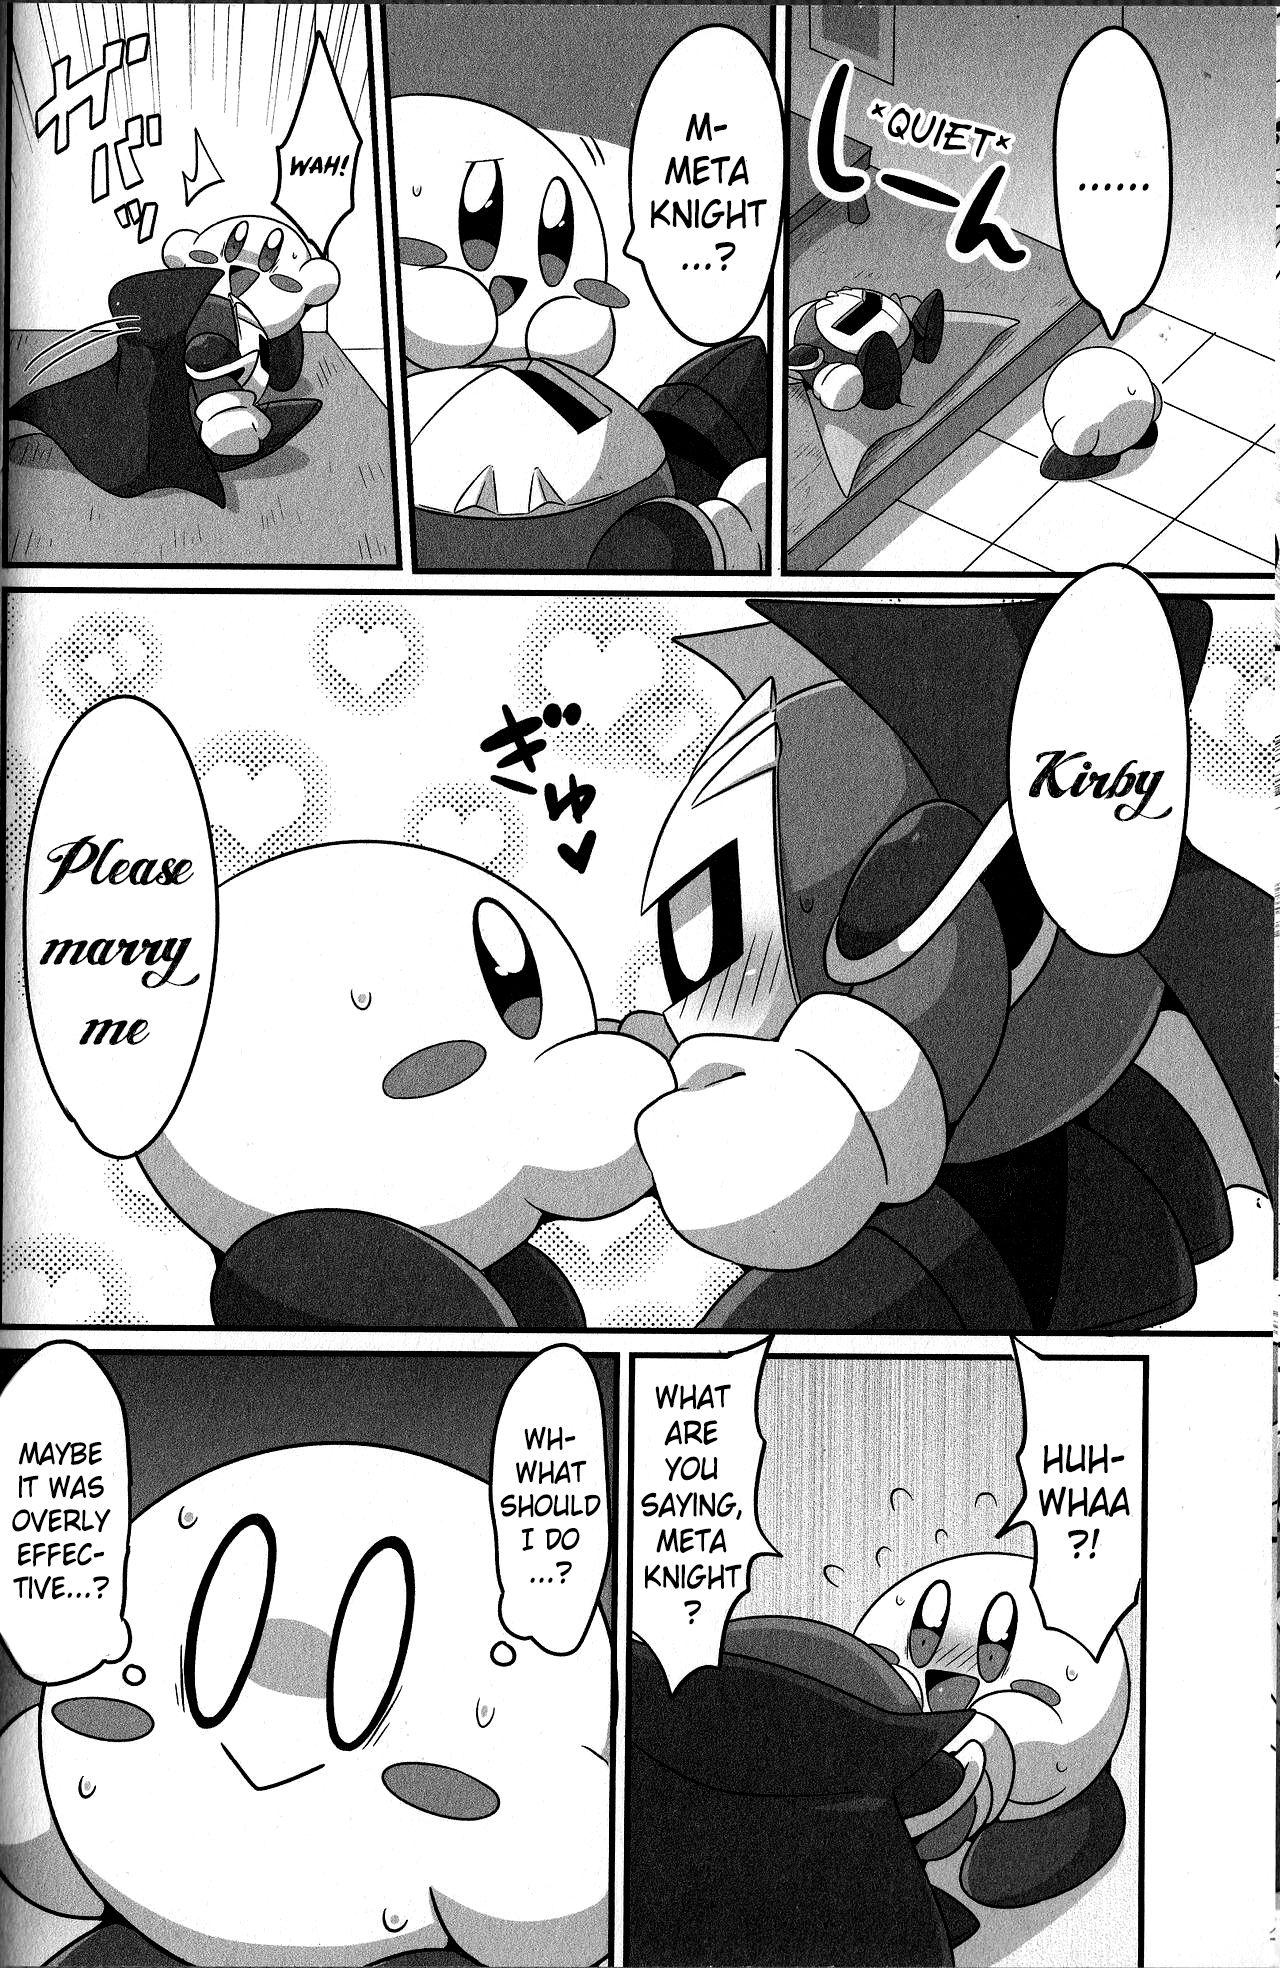 Toying I Want to Do XXX Even For Spheres! - Kirby Para - Page 9